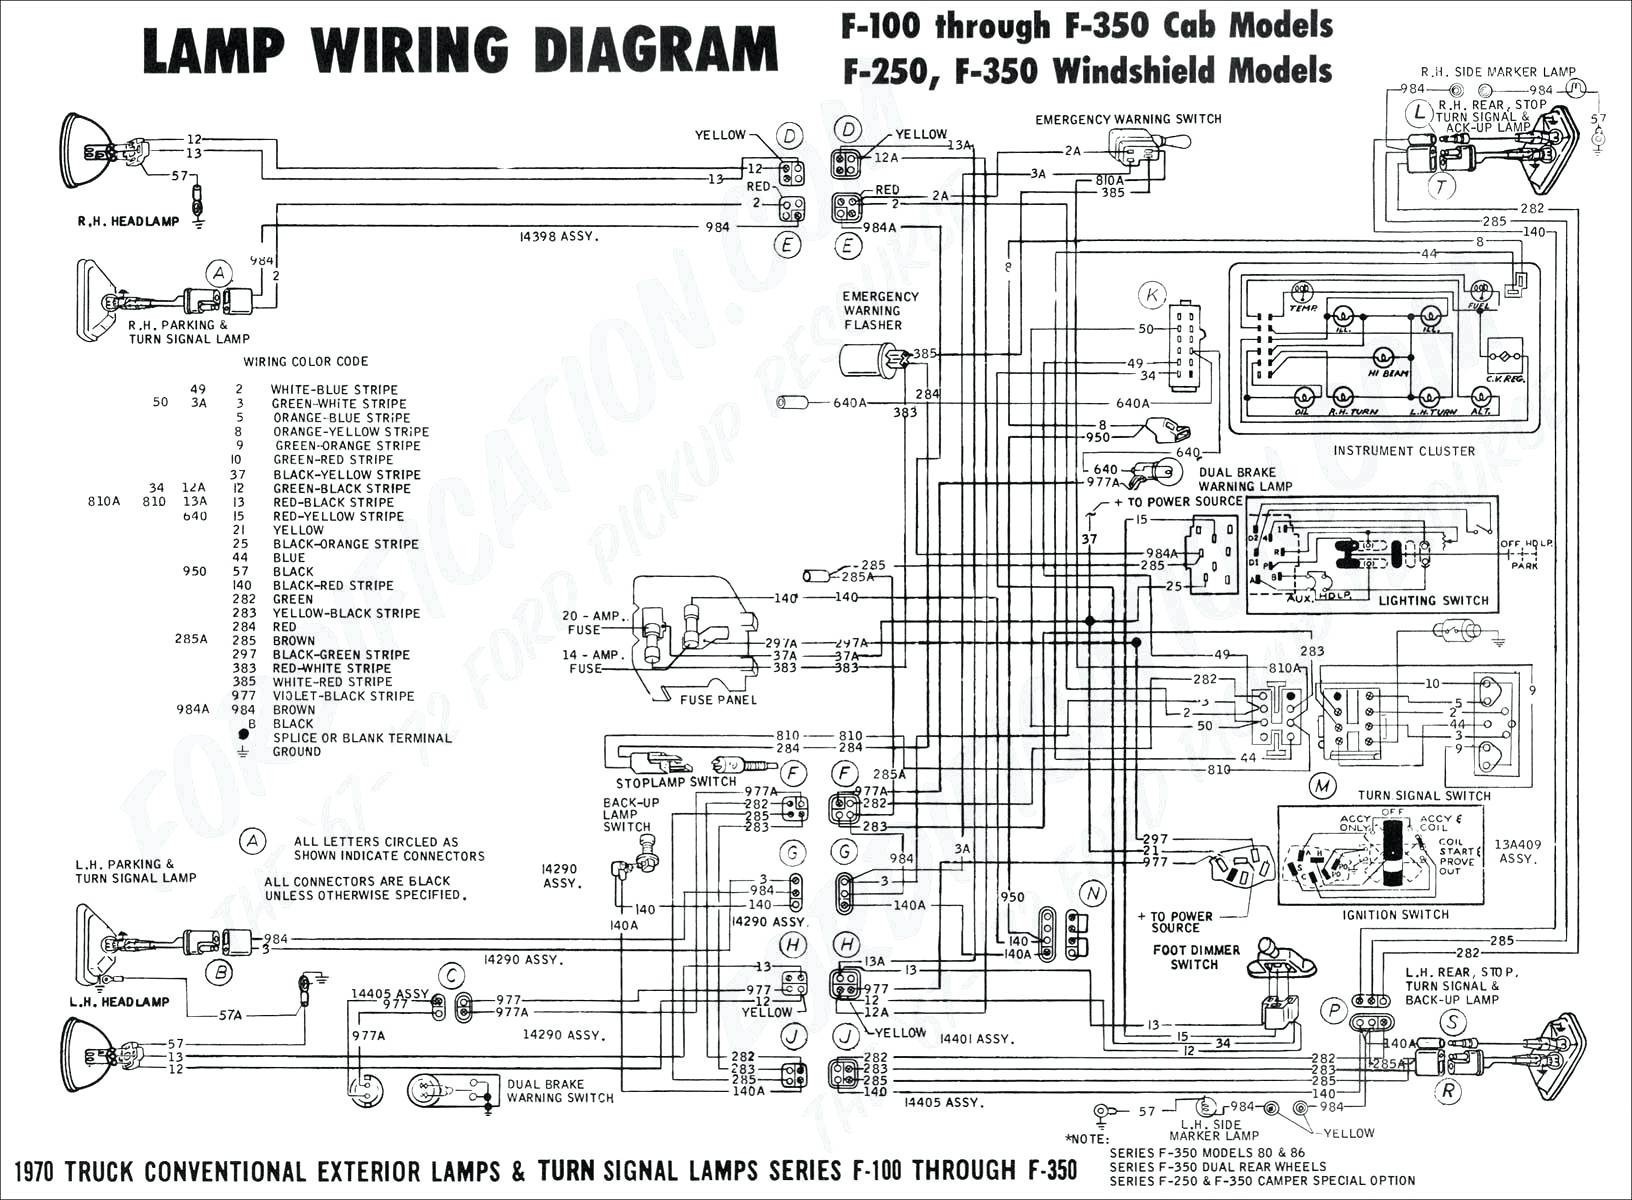 Wiring Diagram for Trailer Lights 2004 F250 Fuse Diagram Trailer Lights Wiring Diagram Used Of Wiring Diagram for Trailer Lights